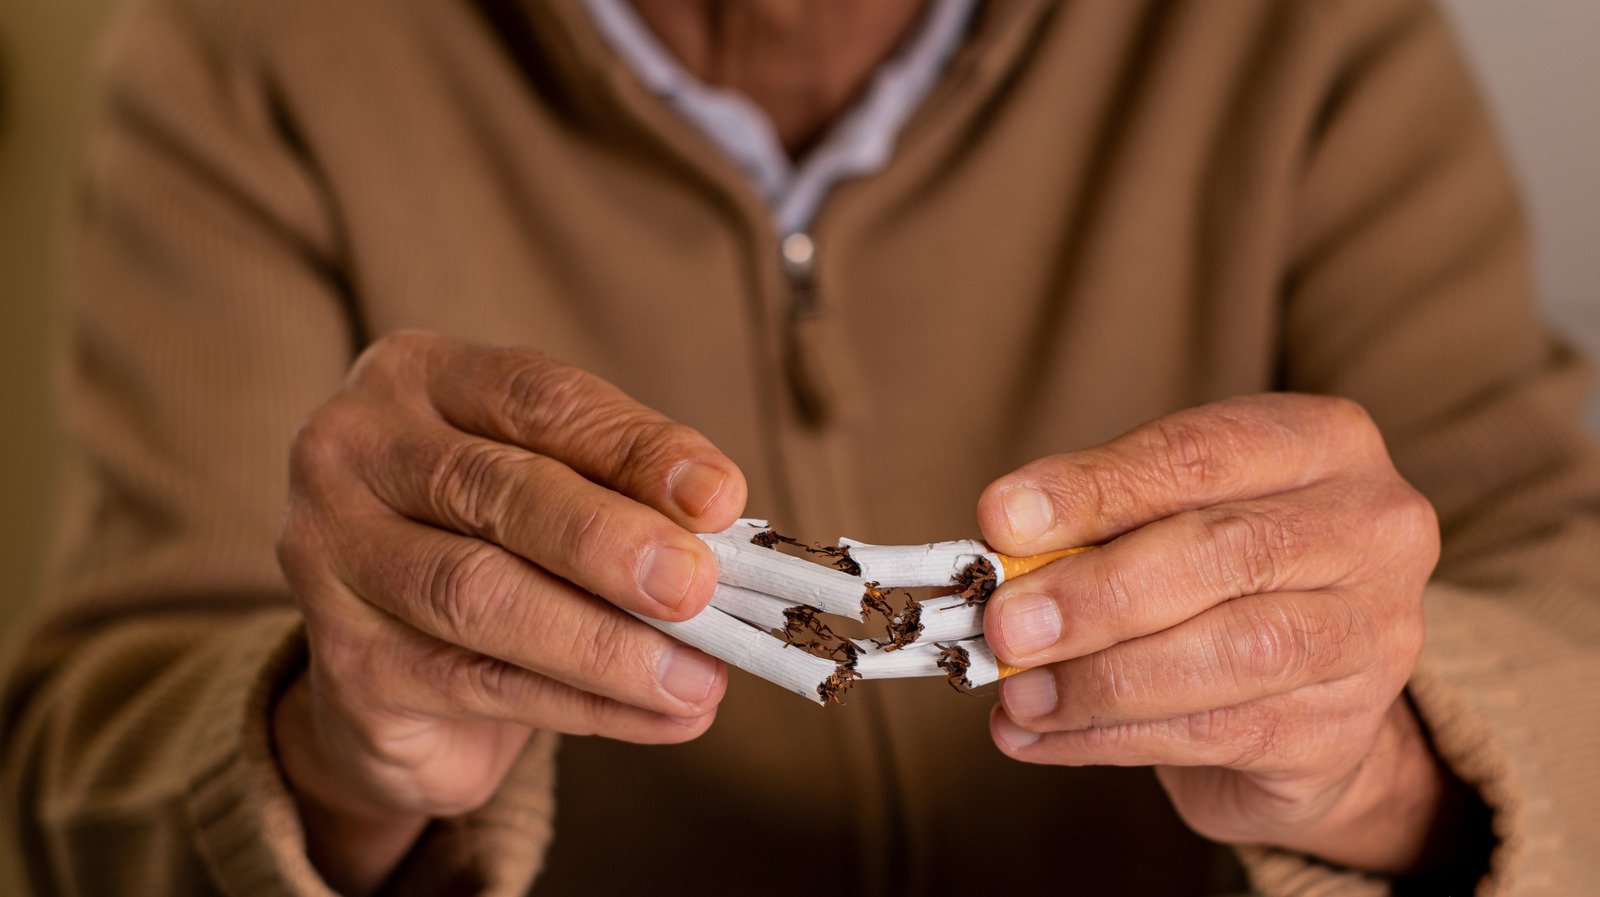 New Study Suggests Age Matters When It Comes To Quitting Smoking